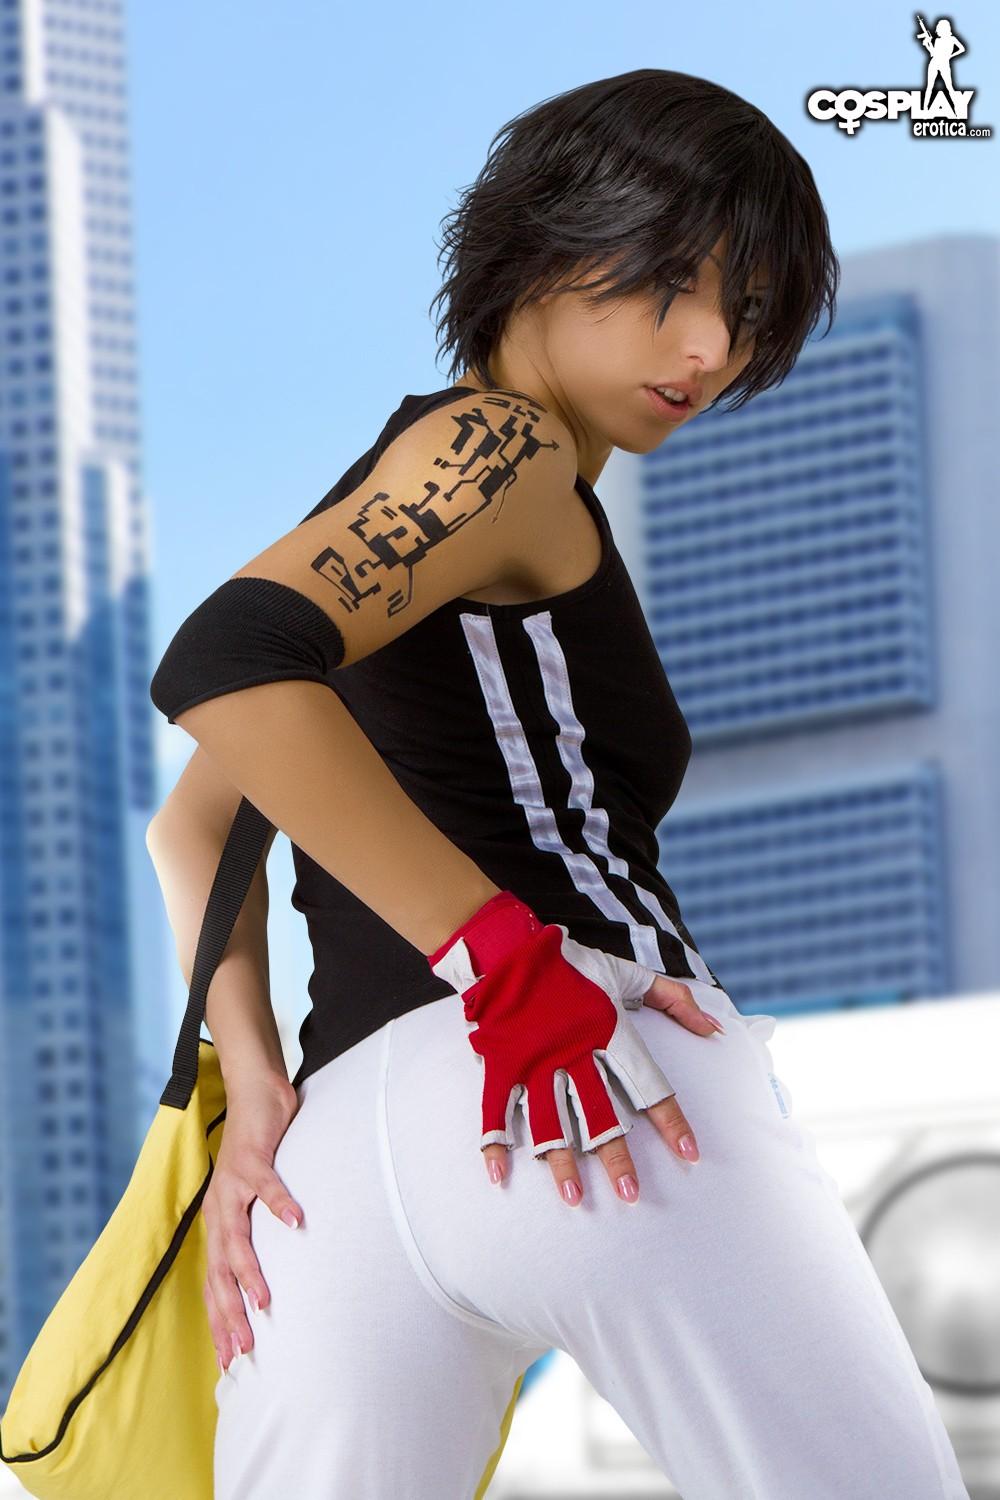 Sexy cosplay girl Anne poses as Faith from Mirror's Edge #53248566